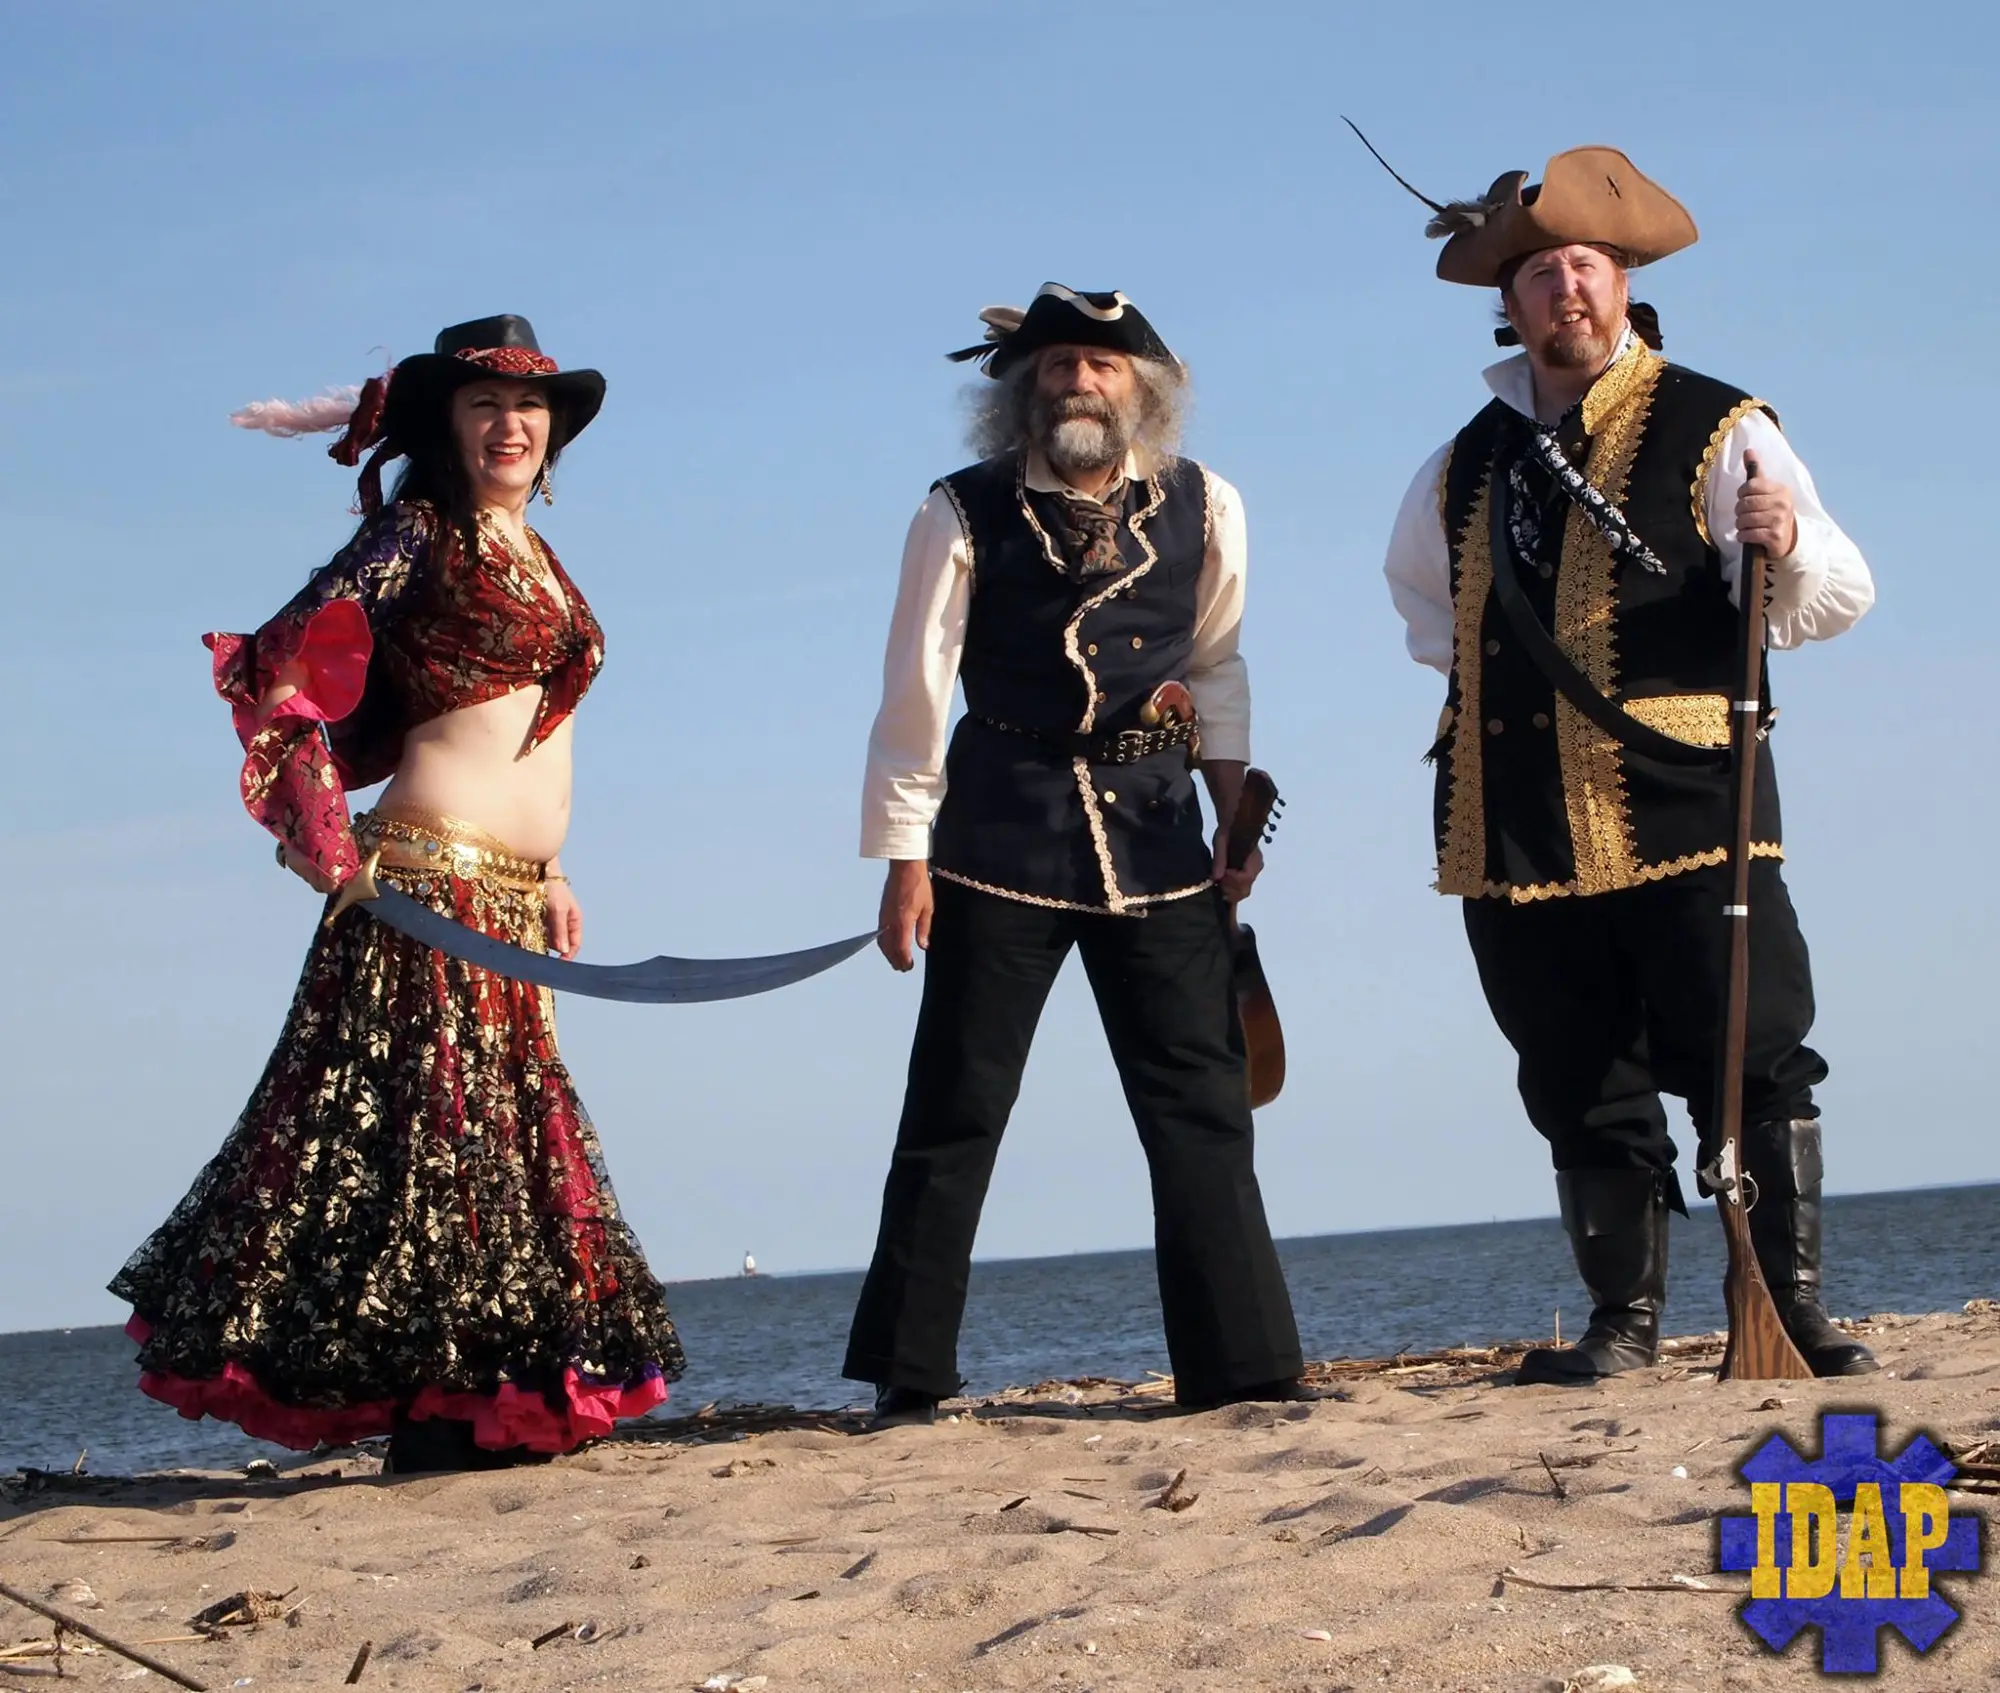 Hire pirates for parties and events - Ginamarie Entertainment